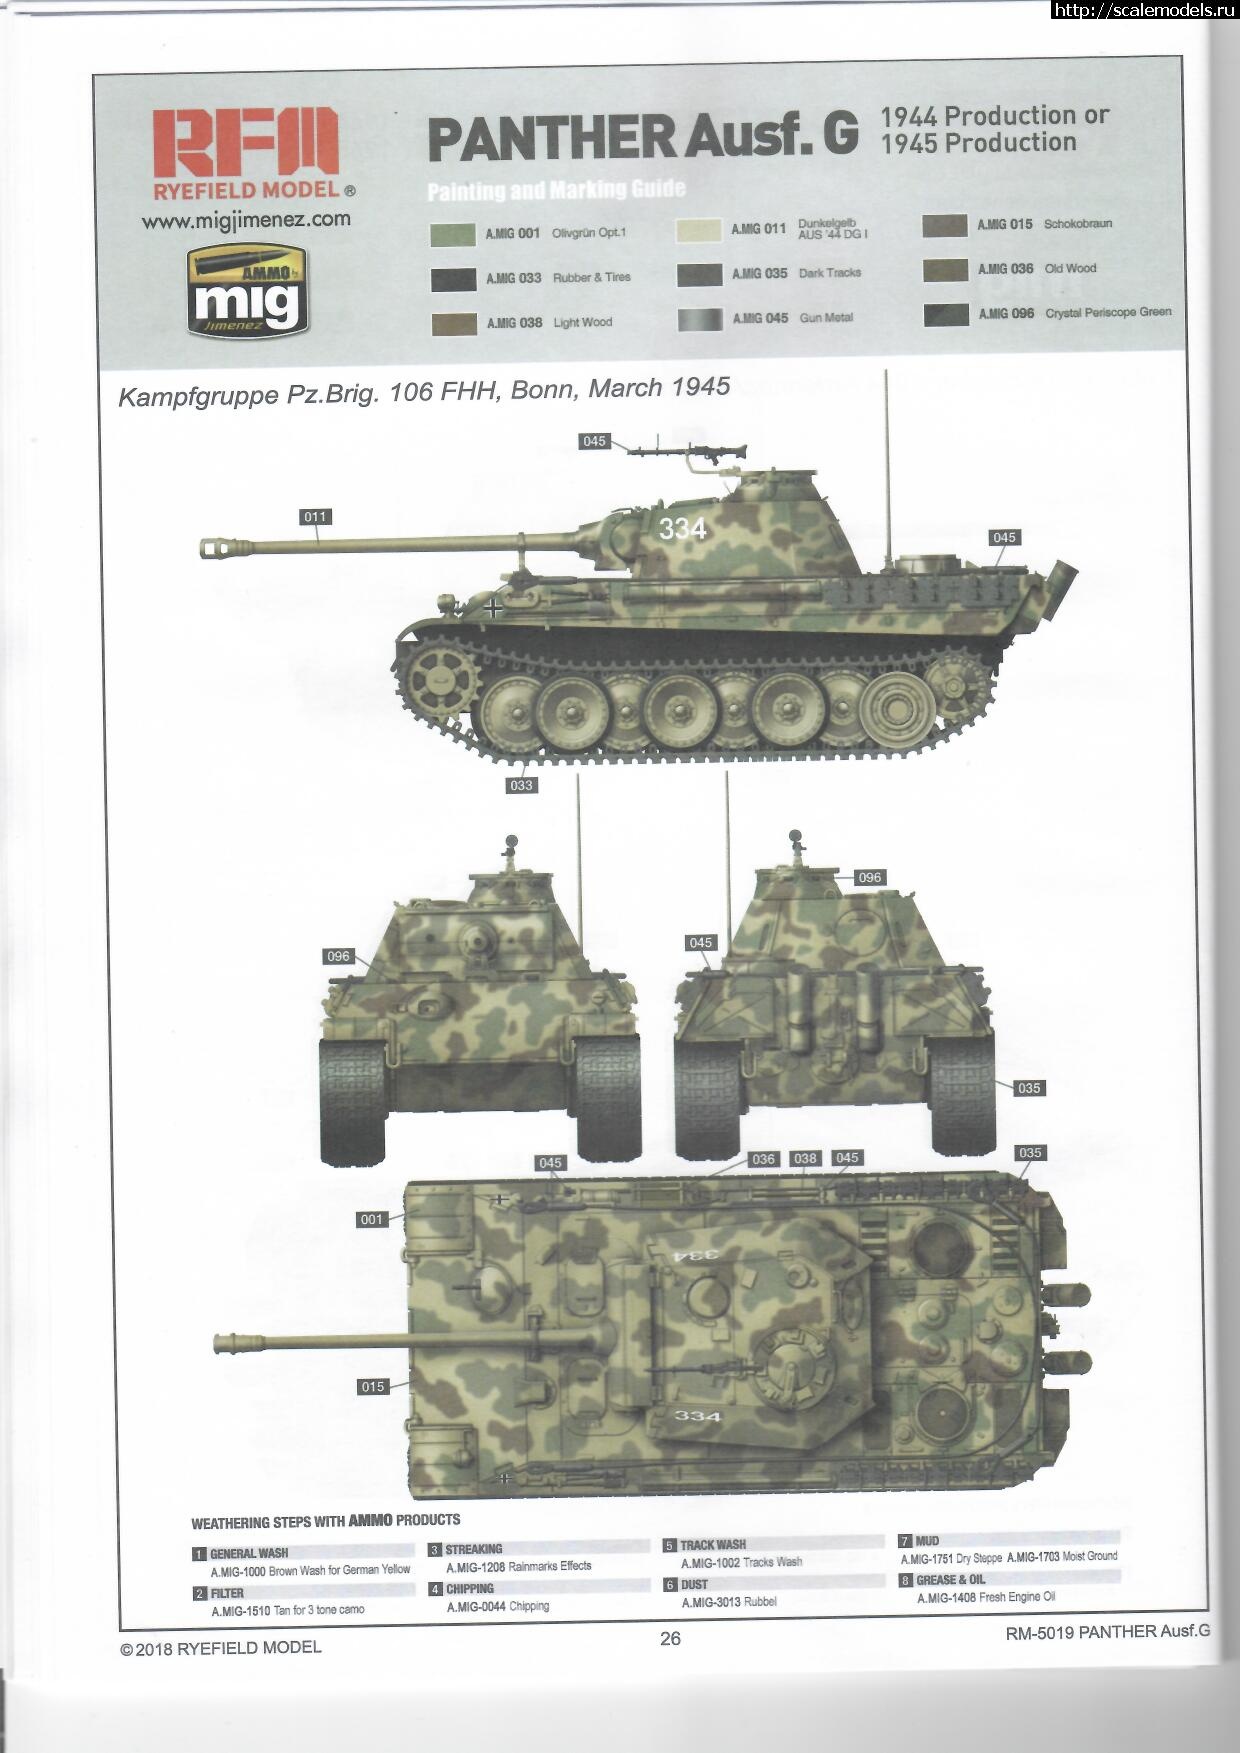 Panther Ausf.G   Ryefield model (RFM) - !!!  